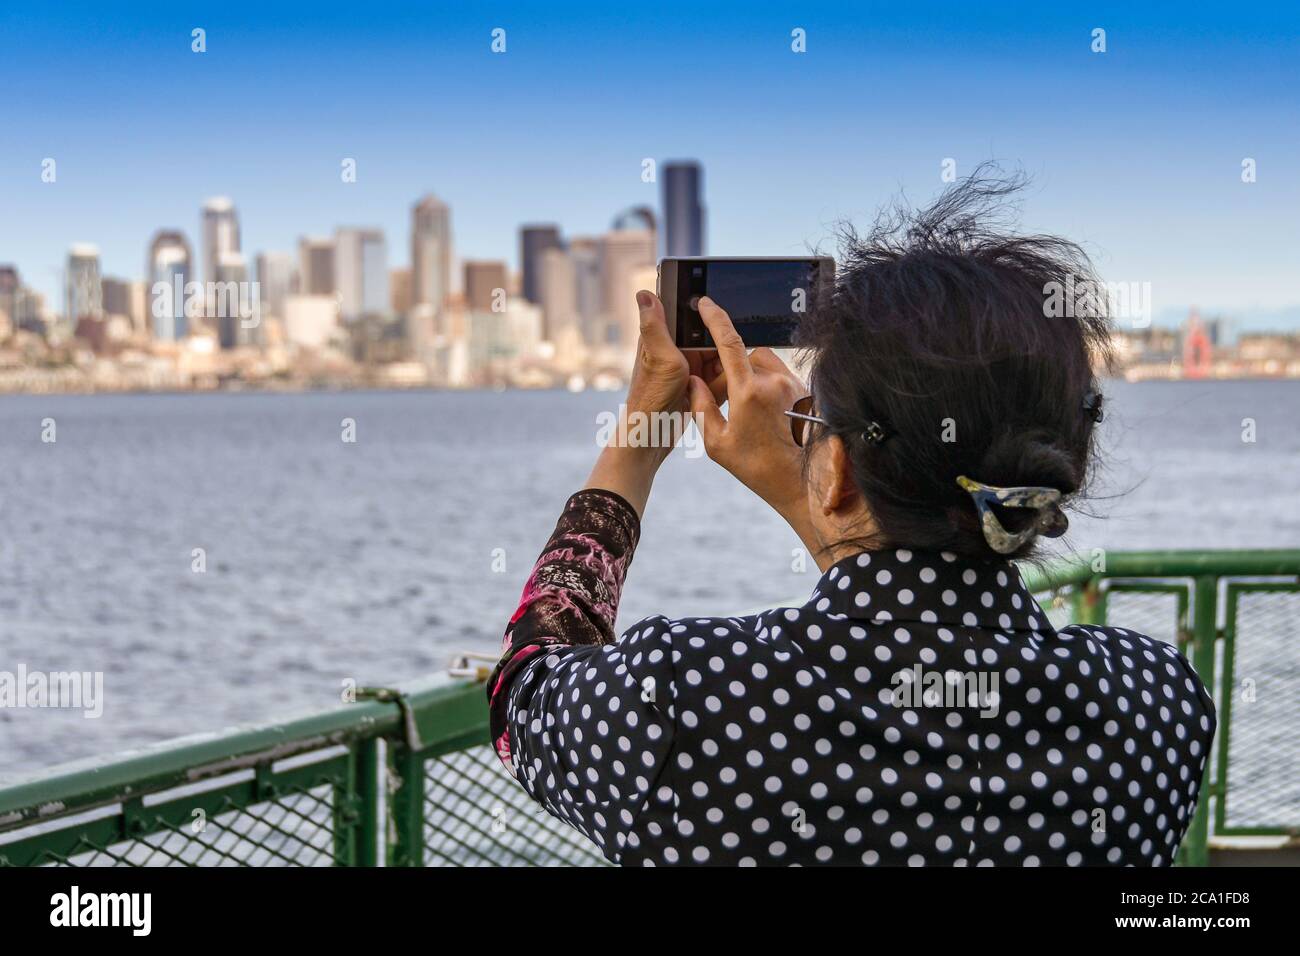 SEATTLE, WASHINGTON STATE, USA - JUNE 2018: Person taking a picture of the city skyline on a camera phone, from the deck of a passenger ferry. Stock Photo